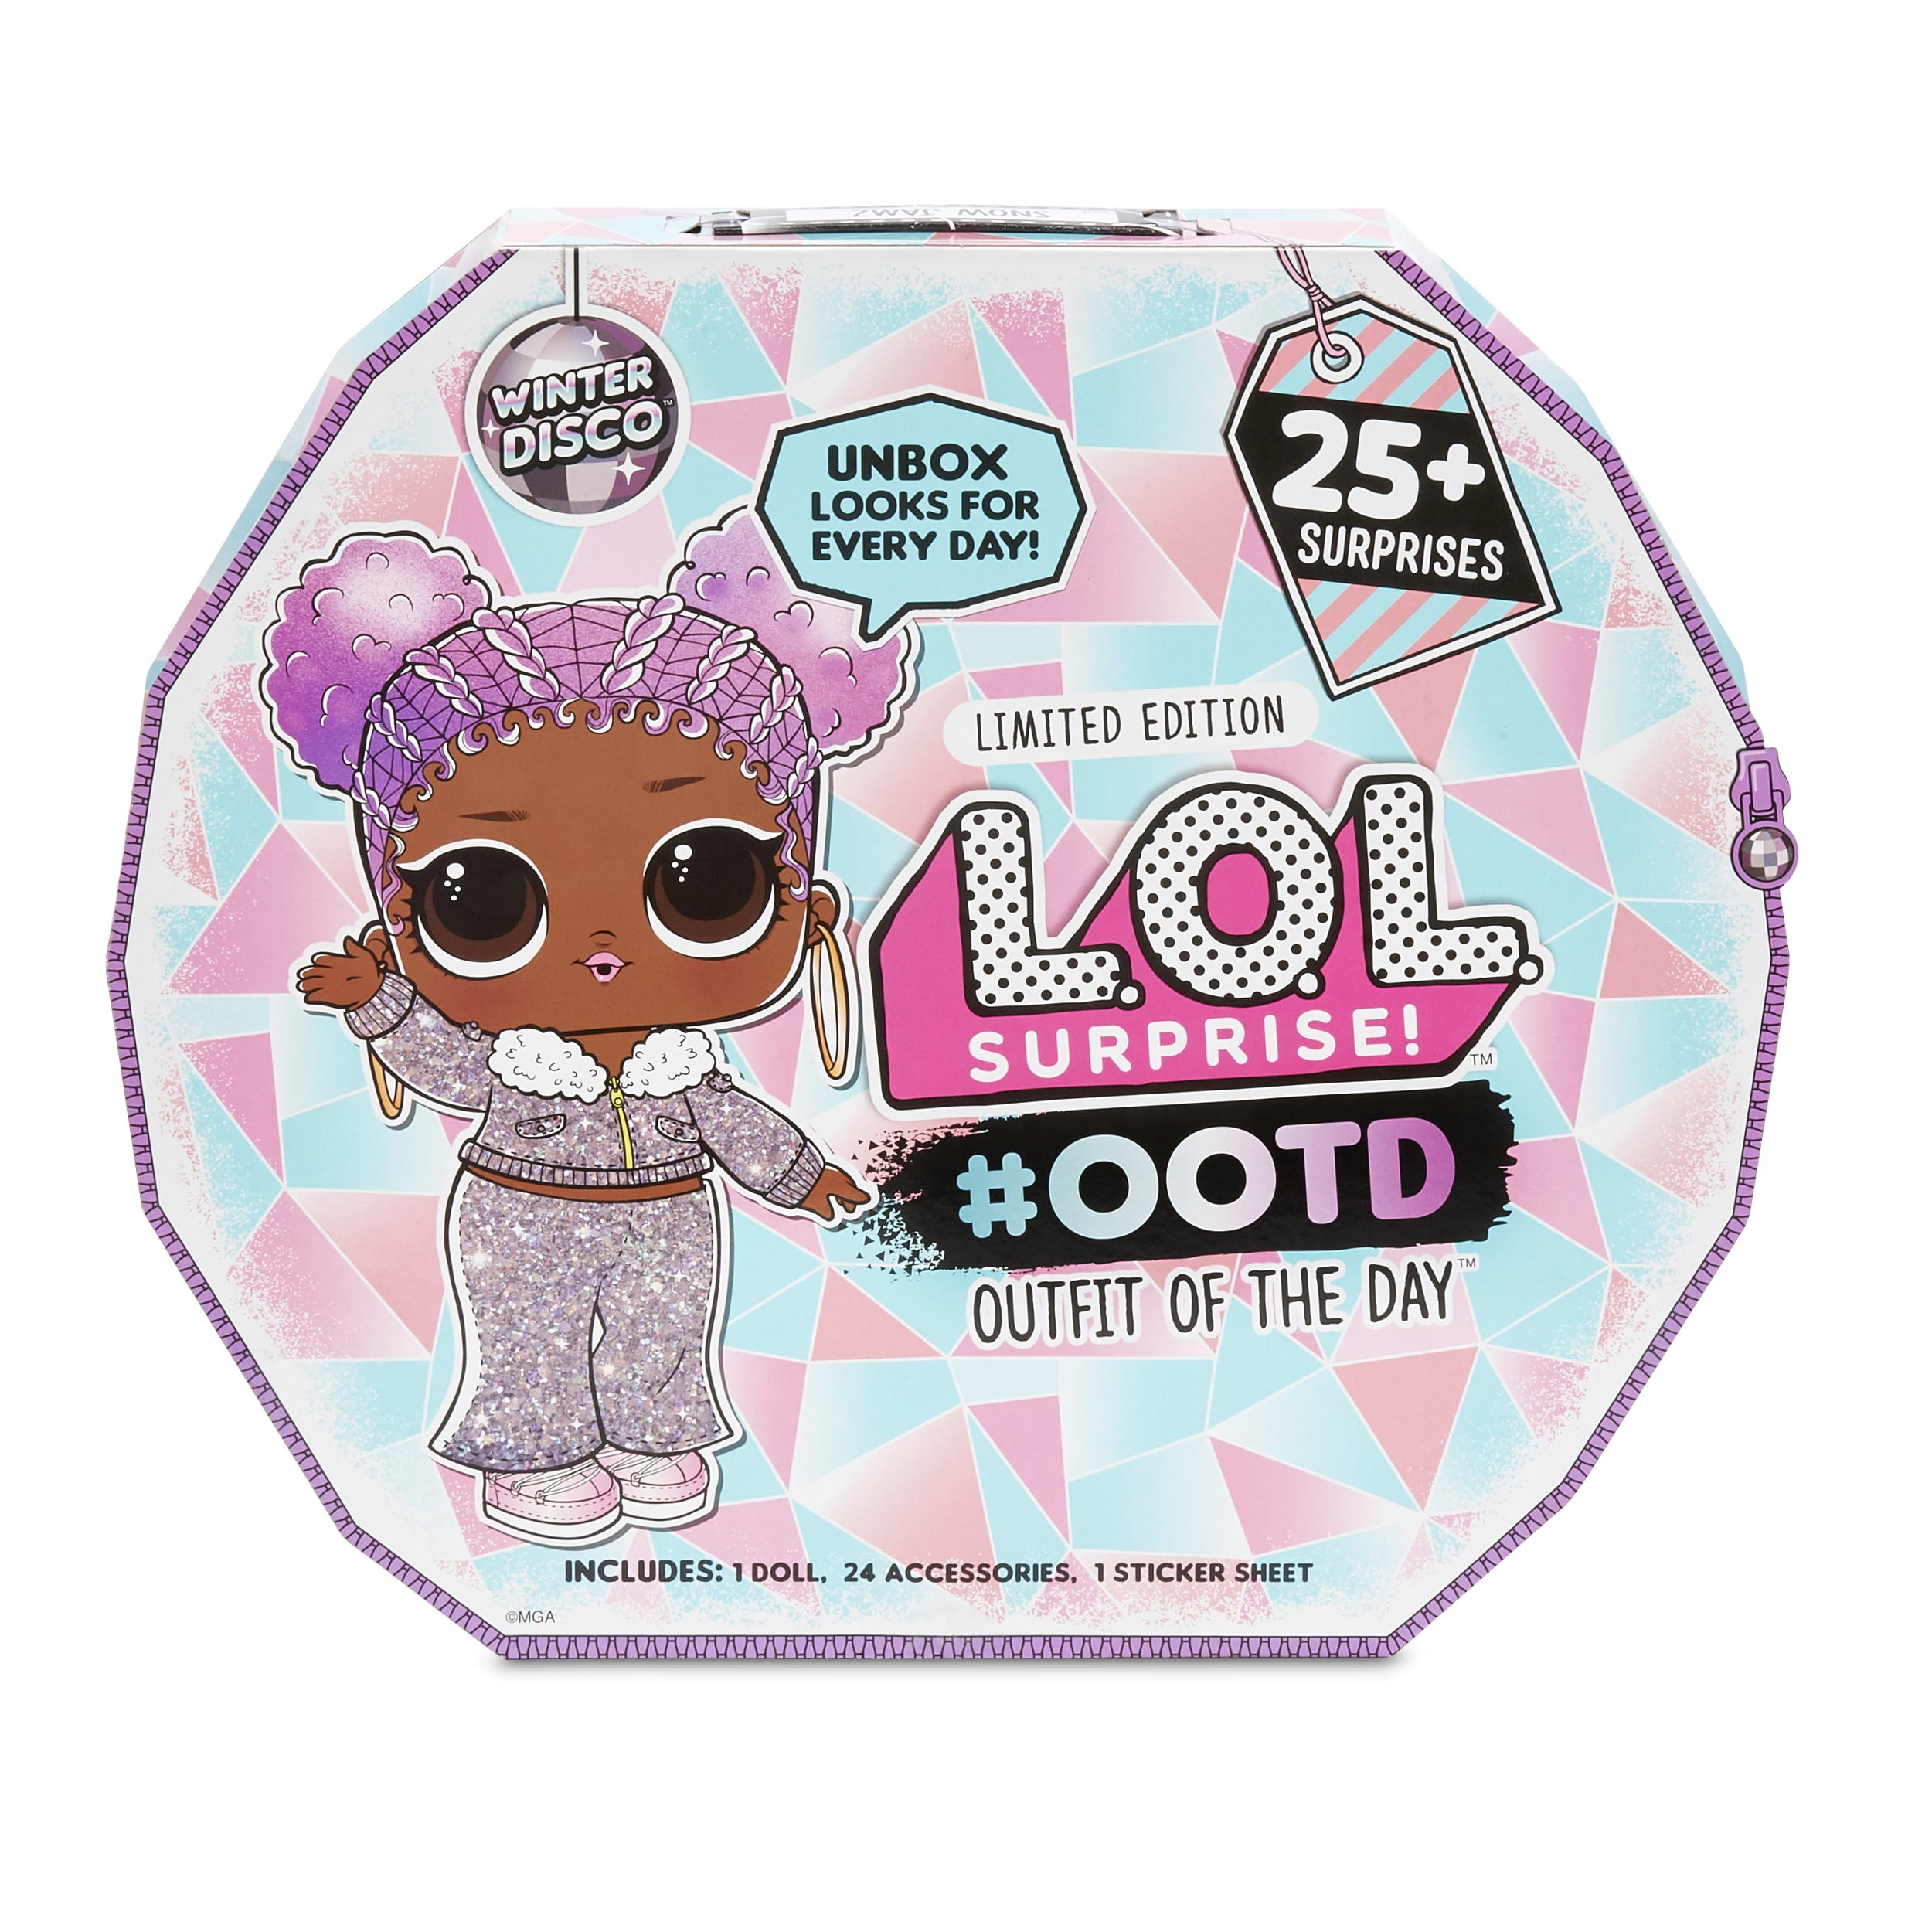 LOL Surprise OOTD Outfit of the Day Winter Disco With Exclusive Doll &  20+ Surprises